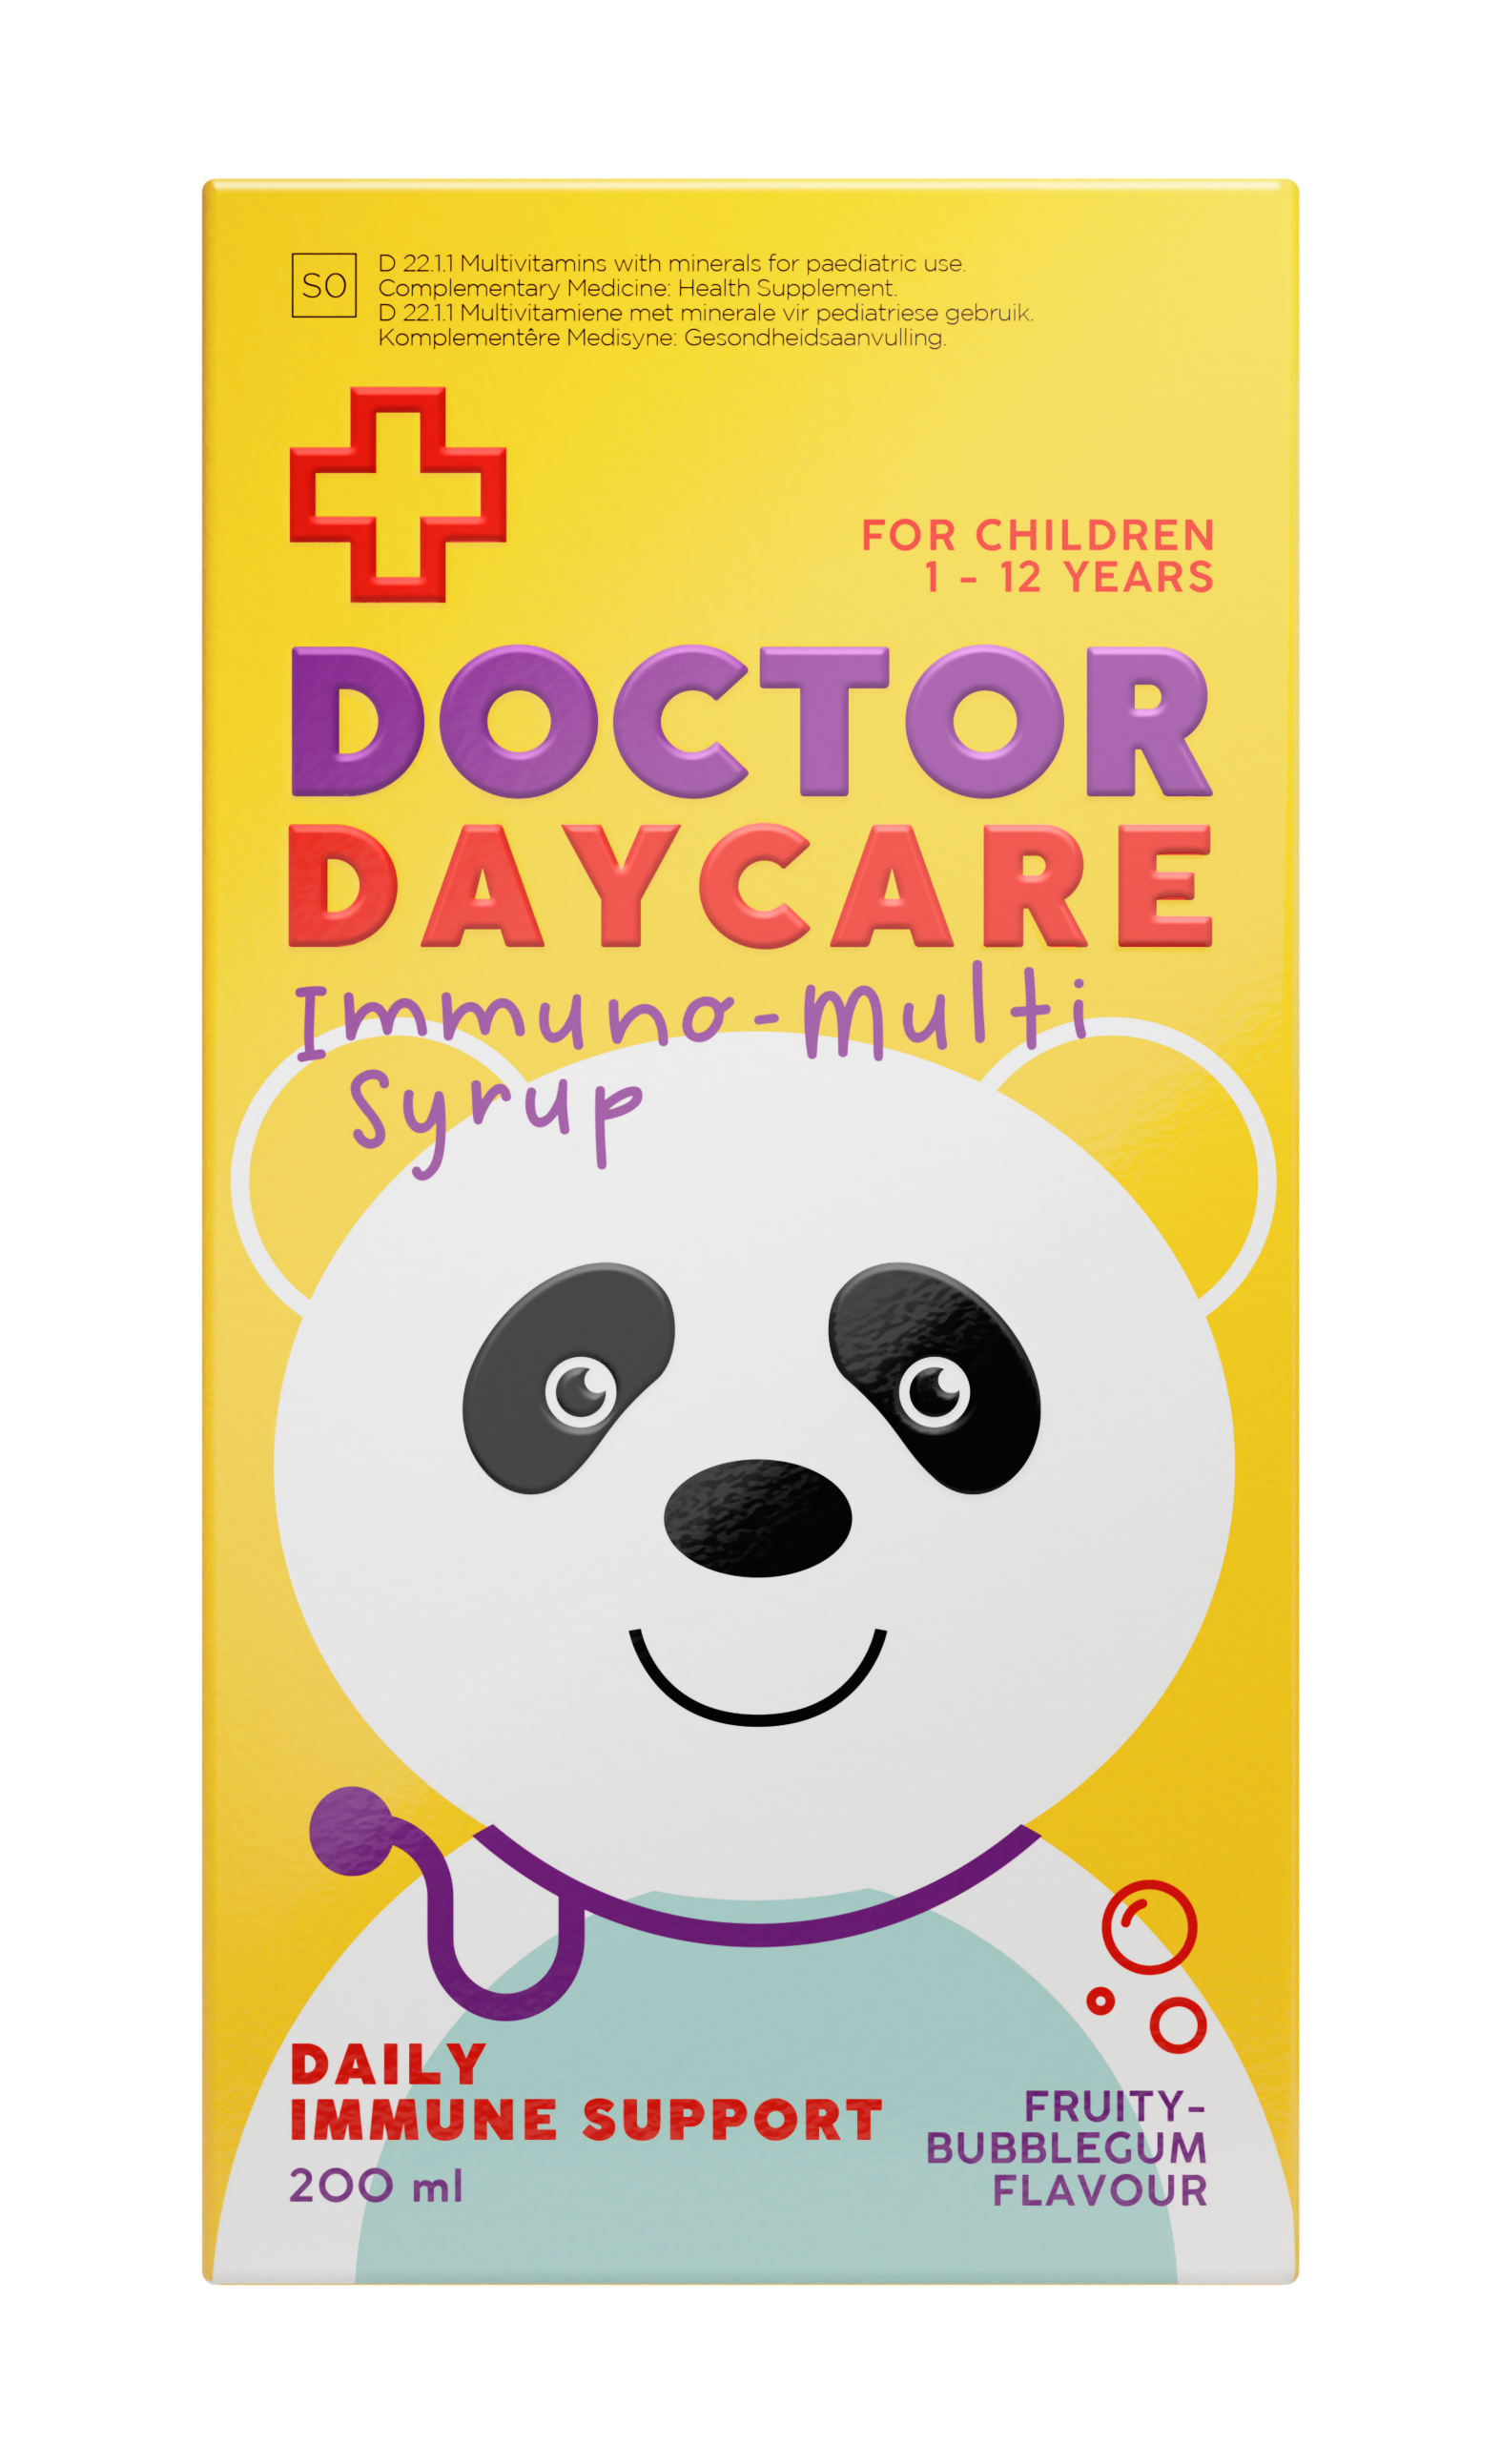 Dr Daycare Immuno box.png